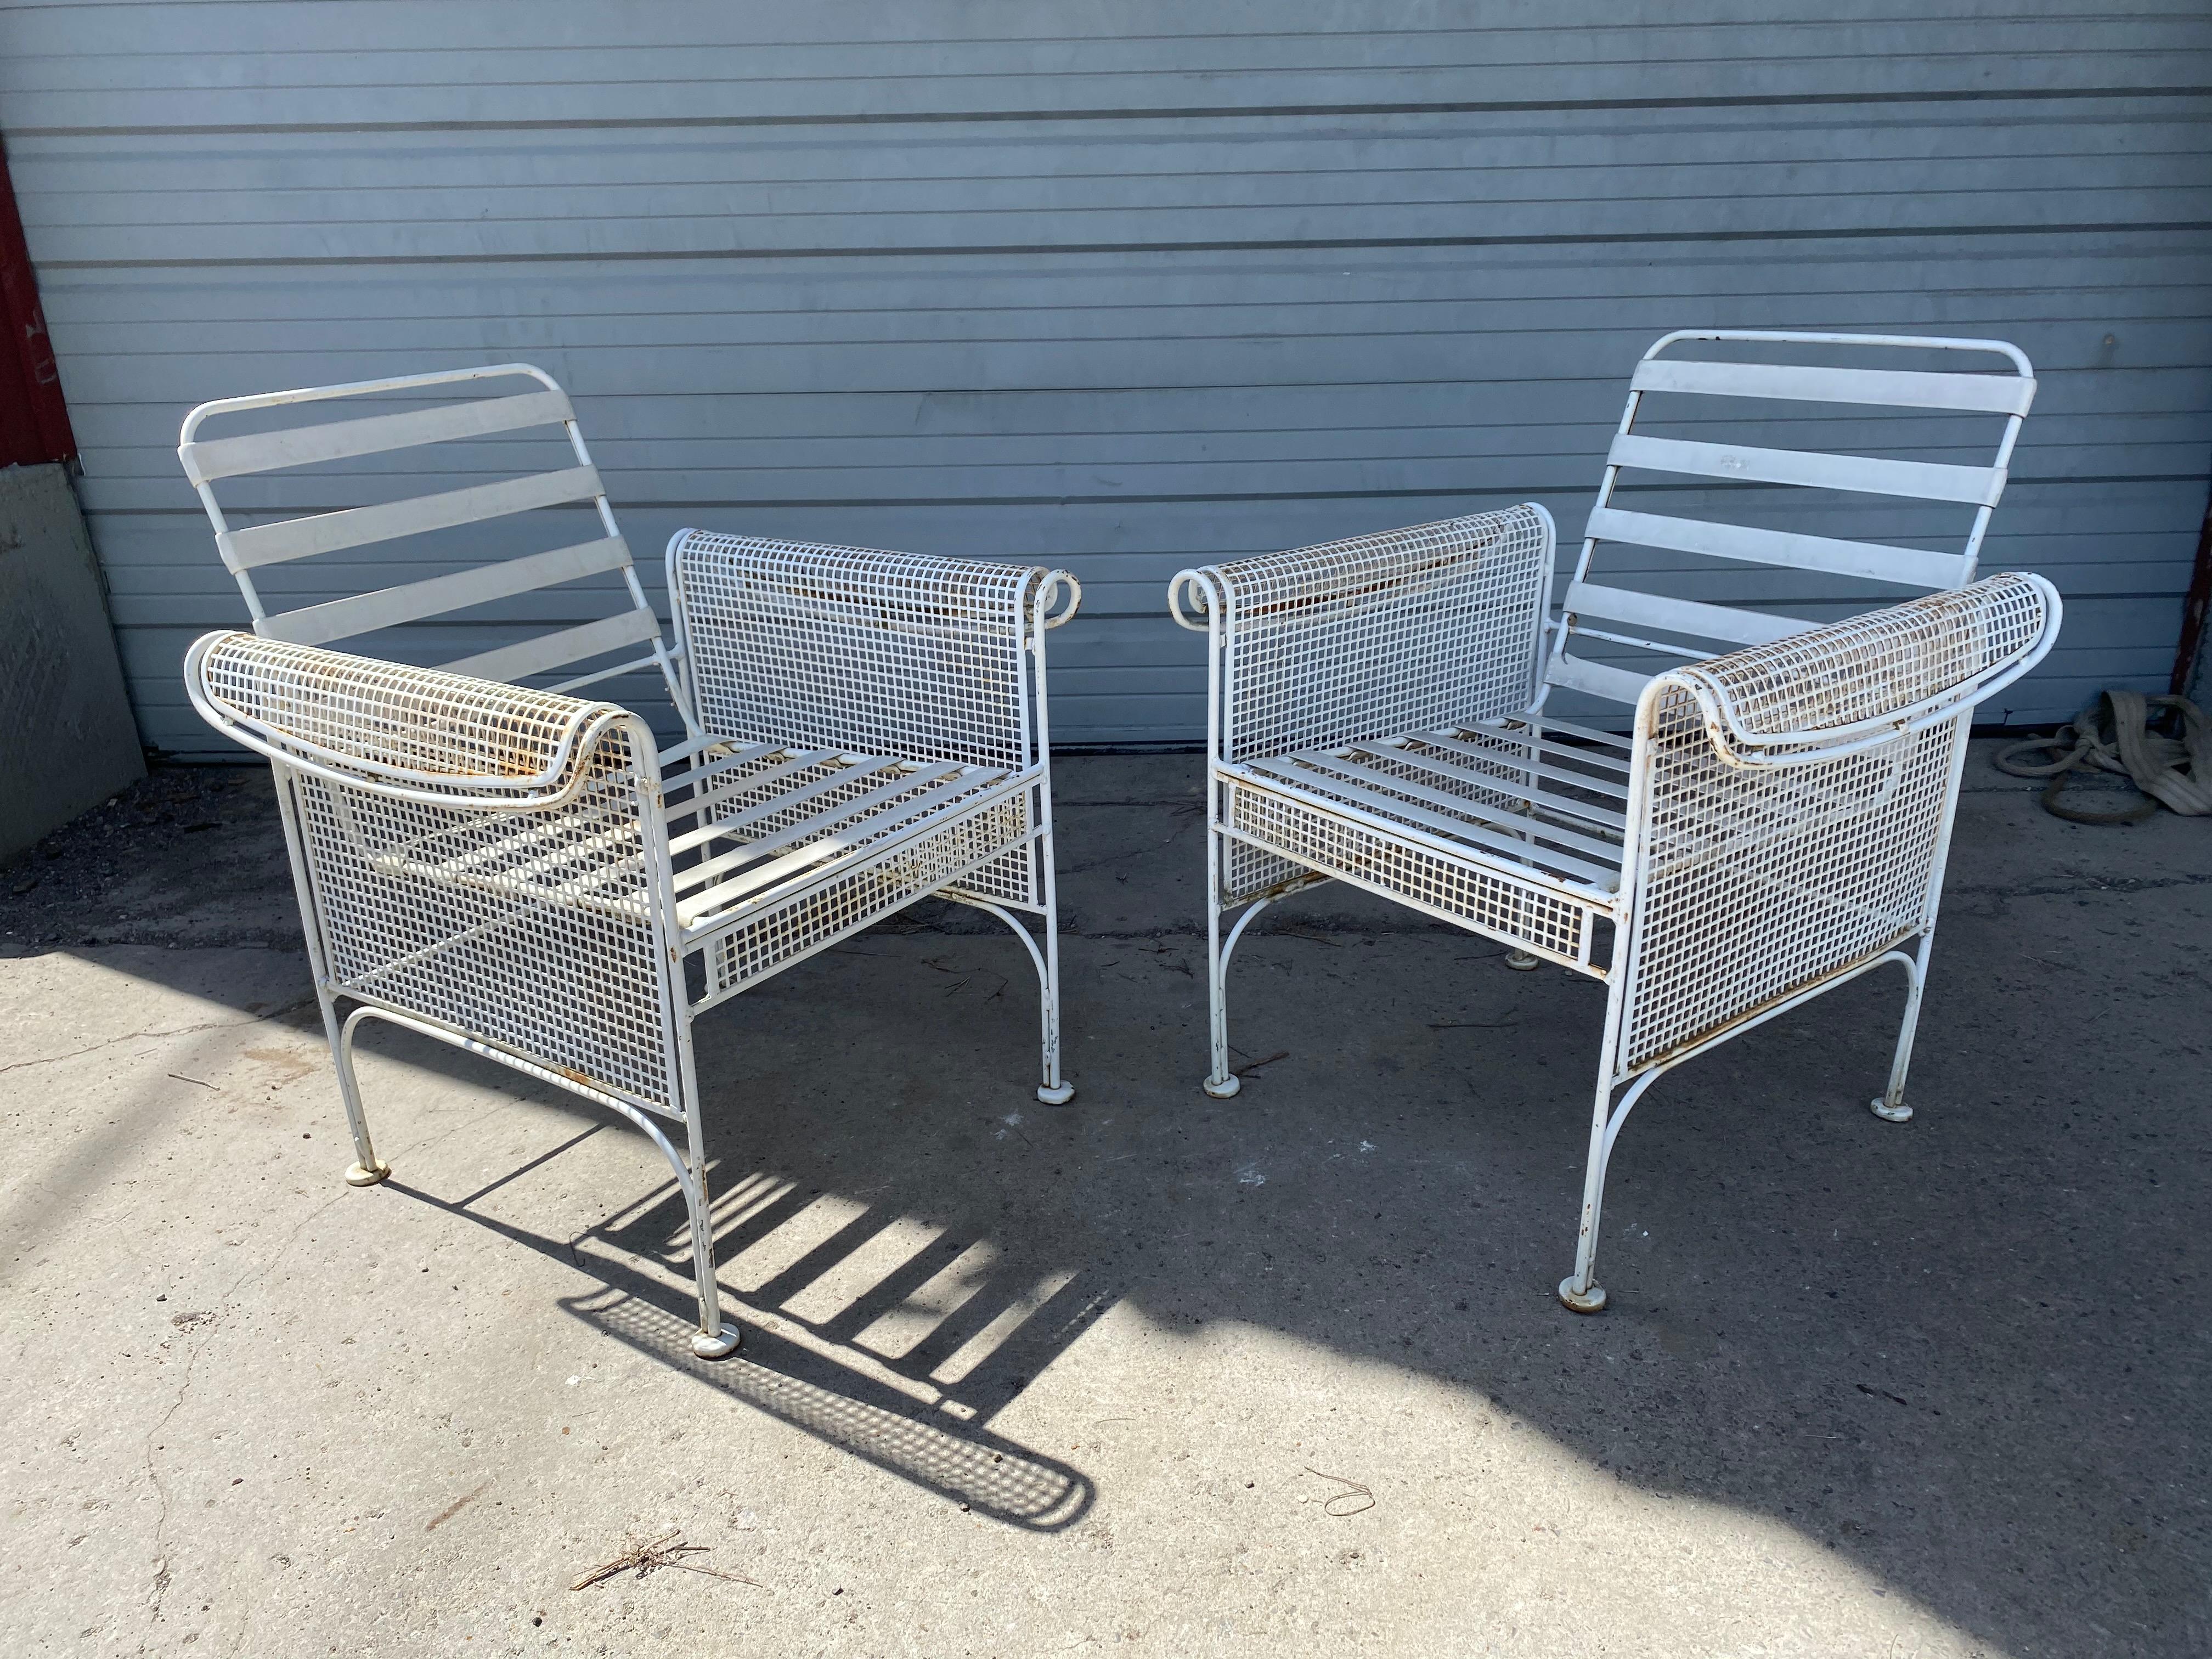 Stunning pair outdoor metal / iron lounge chairs, attributed to Maurizio Tempestini for Salterini. Great classic modernist design, extremely comfortable, retain newer seat and back cushions. Hand delivery avail to New York City or anywhere en route